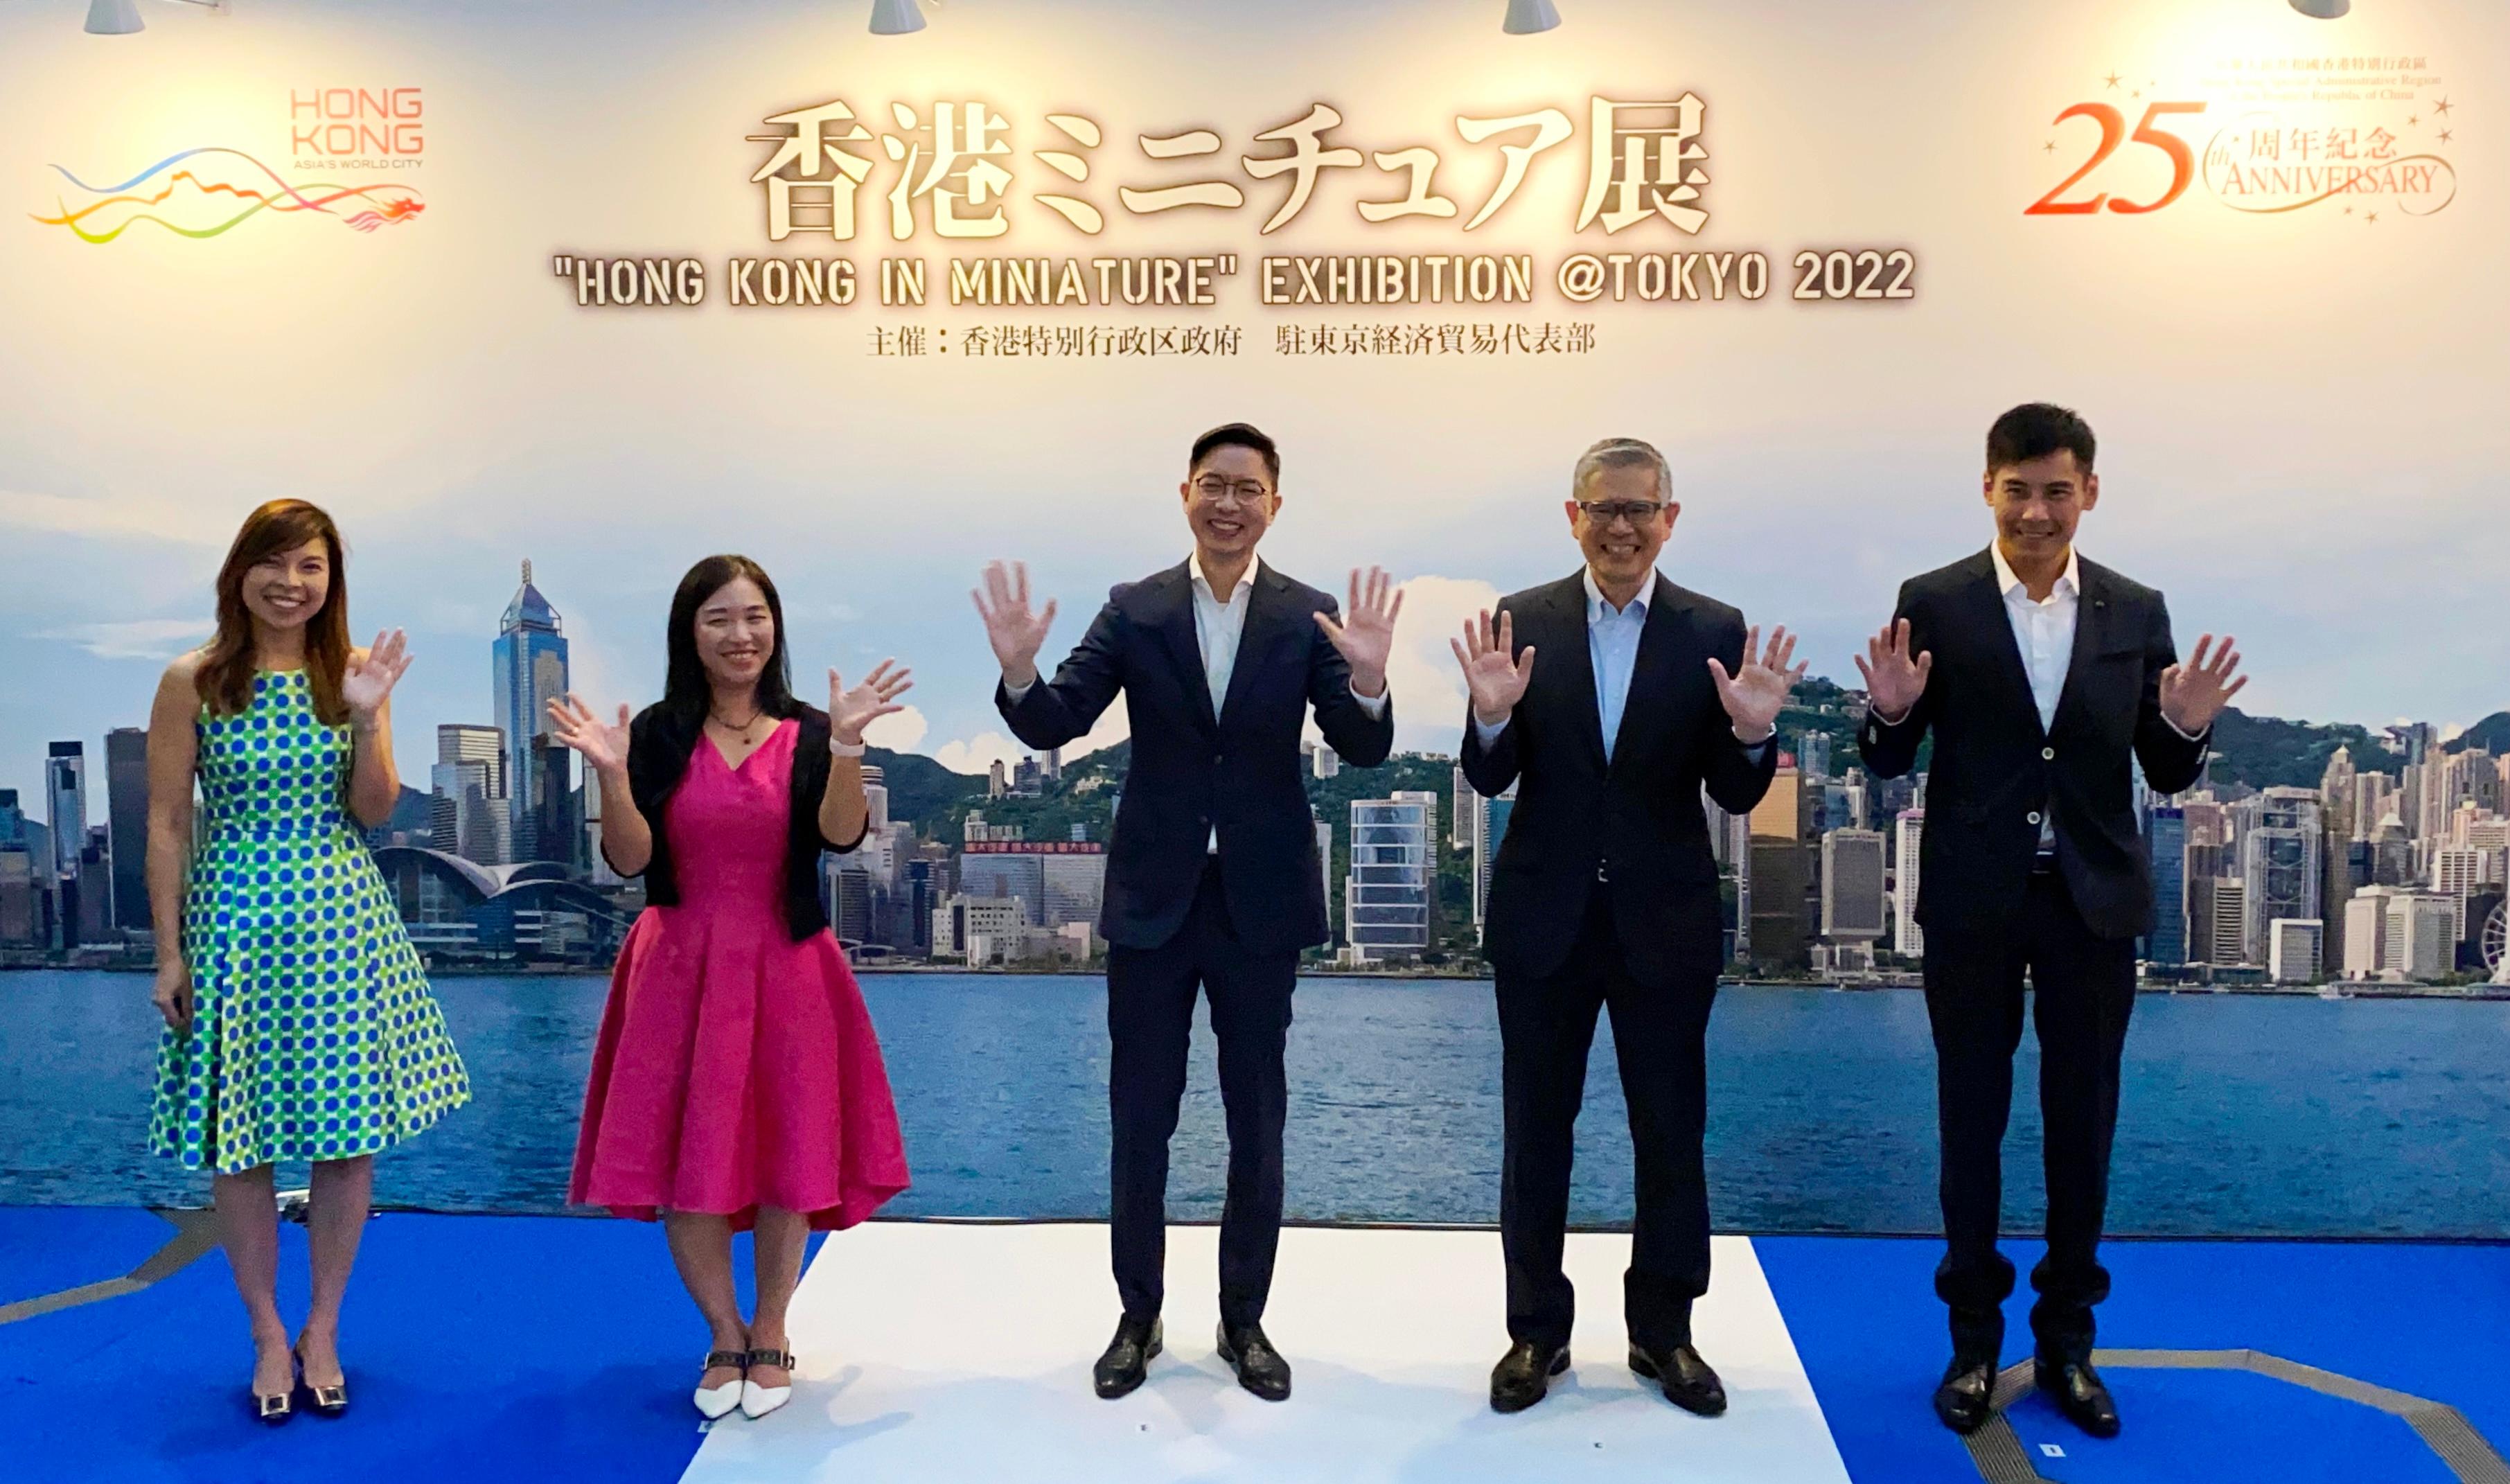 "Hong Kong in Miniature" Exhibition @Tokyo 2022, which showcases 40 miniature models that capture the uniqueness and vibrancy of Hong Kong, opened in Tokyo, Japan, today (July 28). The Acting Principal Hong Kong Economic and Trade Representative (Tokyo), Mr Thomas Wu (centre), is pictured with the Hong Kong Economic and Trade Representative (Tokyo) (designate), Miss Winsome Au (first left); the Regional Director of Japan of the Hong Kong Tourism Board, Mr Kazunori Hori (second right); the Regional General Manager, North East Asia, of Cathay Pacific Airways, Mr Nelson Chin (first right); and the Chairman of the Joyful Miniature Association, Ms Carmen Poon (second left).